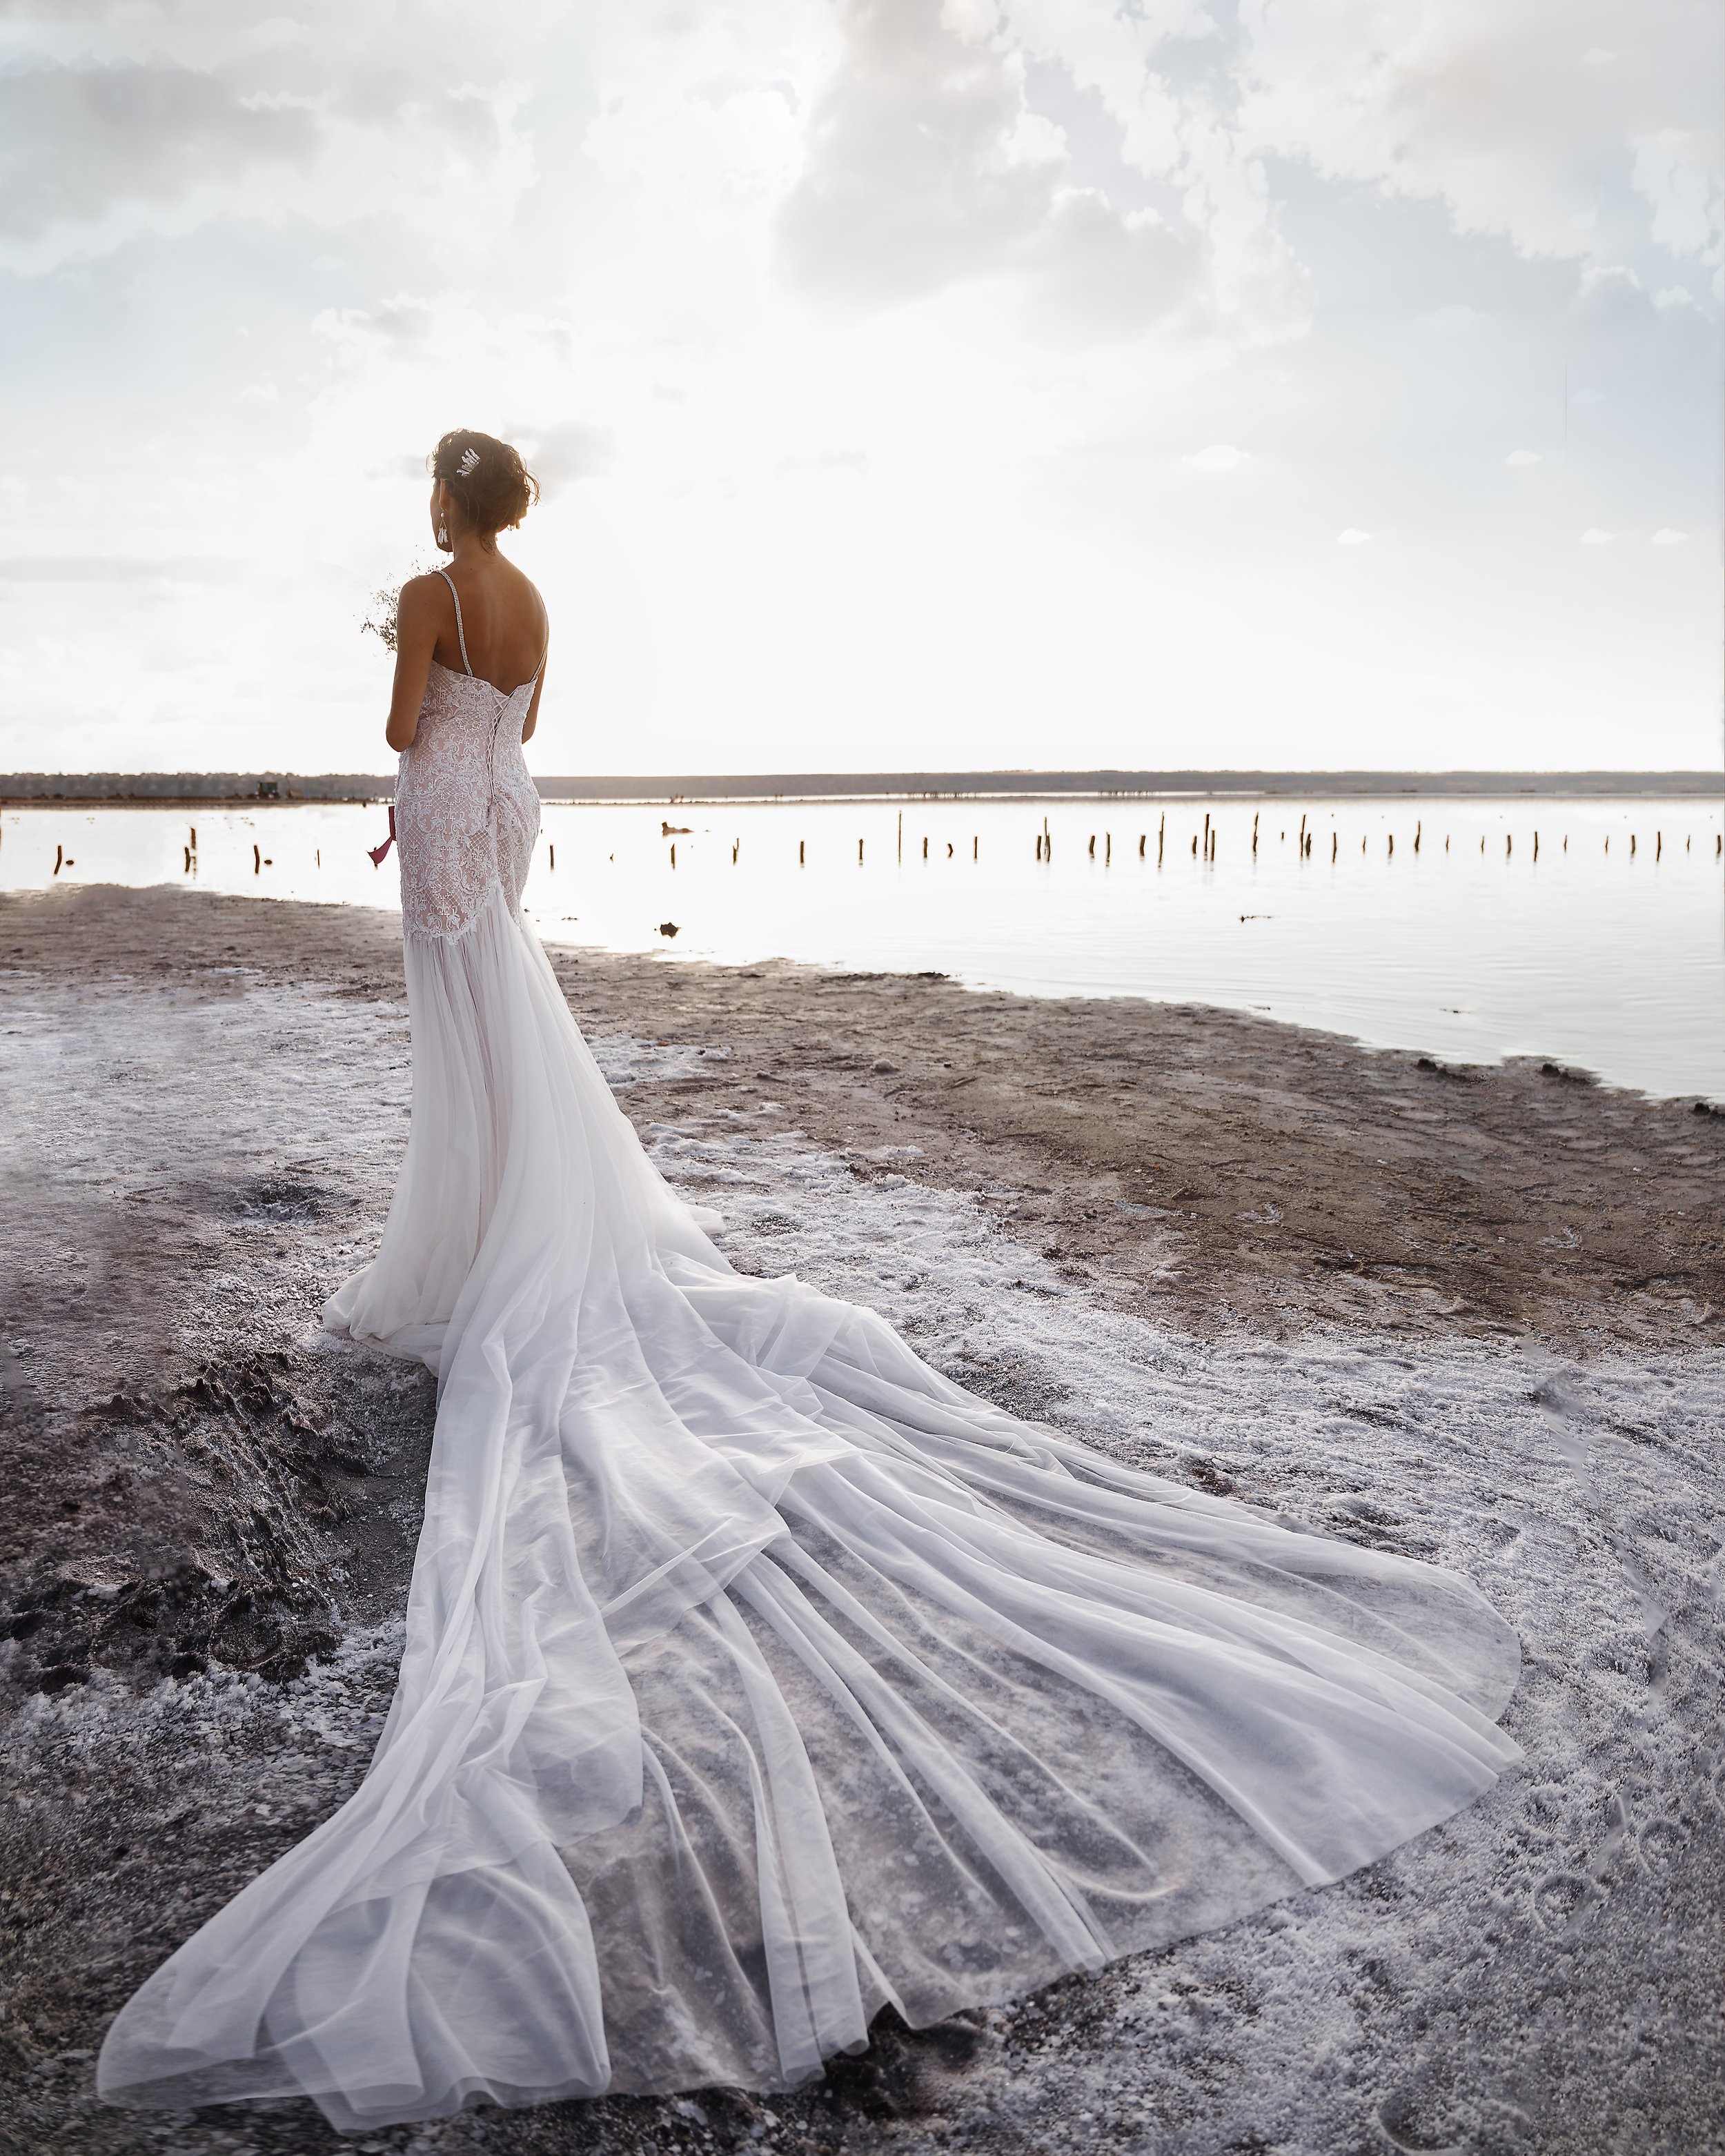  Under a grey cloudy sky, the bride is stood on a beach with her back to the wedding photographer looking out to the distance across the sea. The bride is wearing a white, strappy, long wedding dress with a long train which has been laid out across t